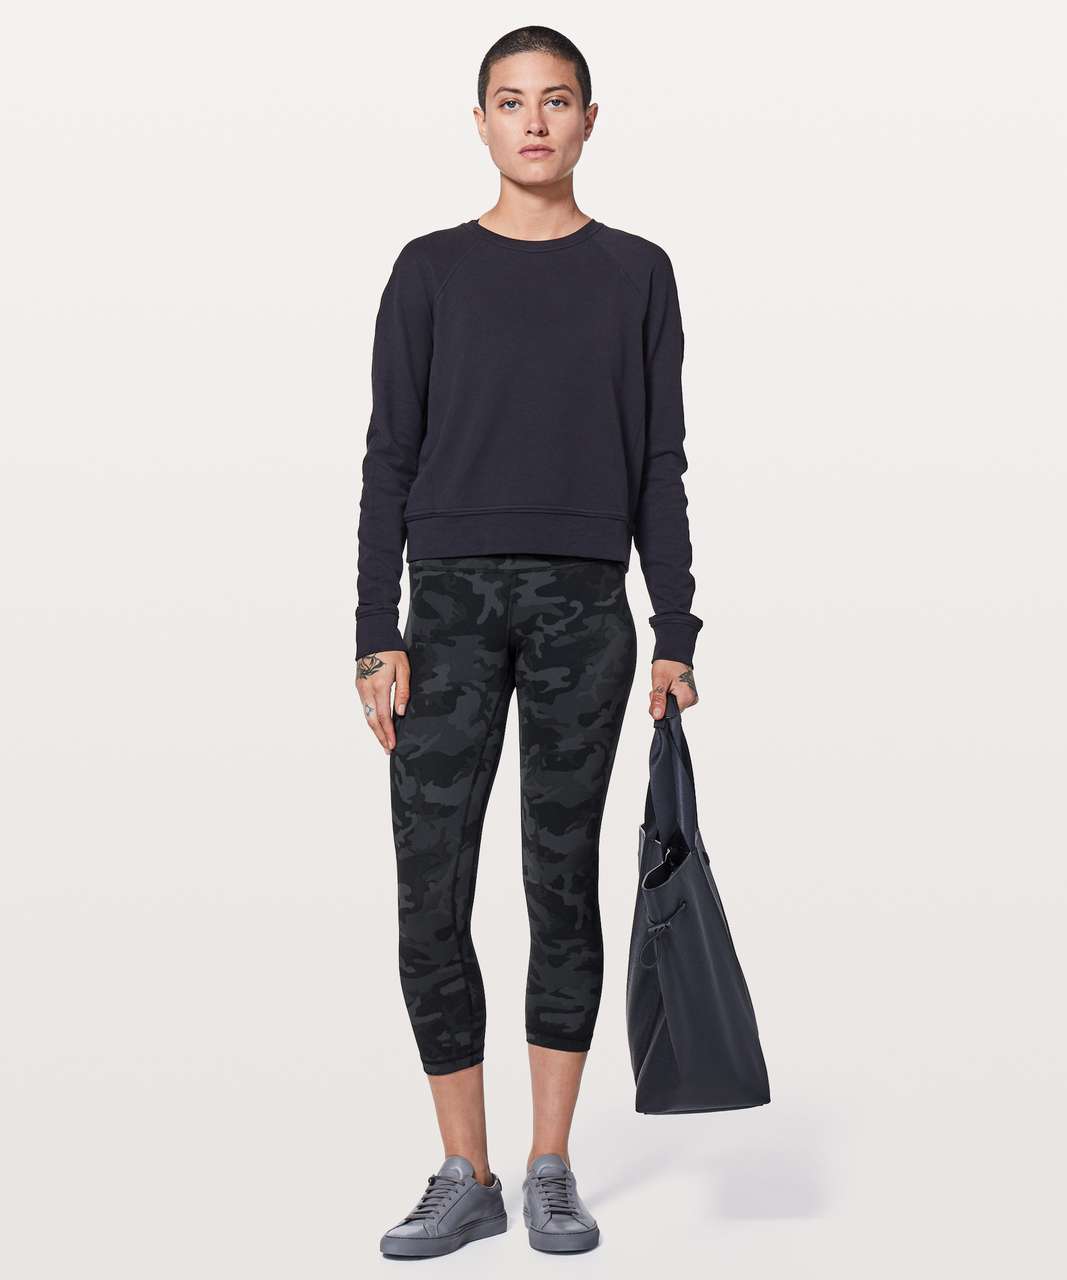 Lululemon Align Crop *21" - Incognito Camo Multi Grey (First Release)